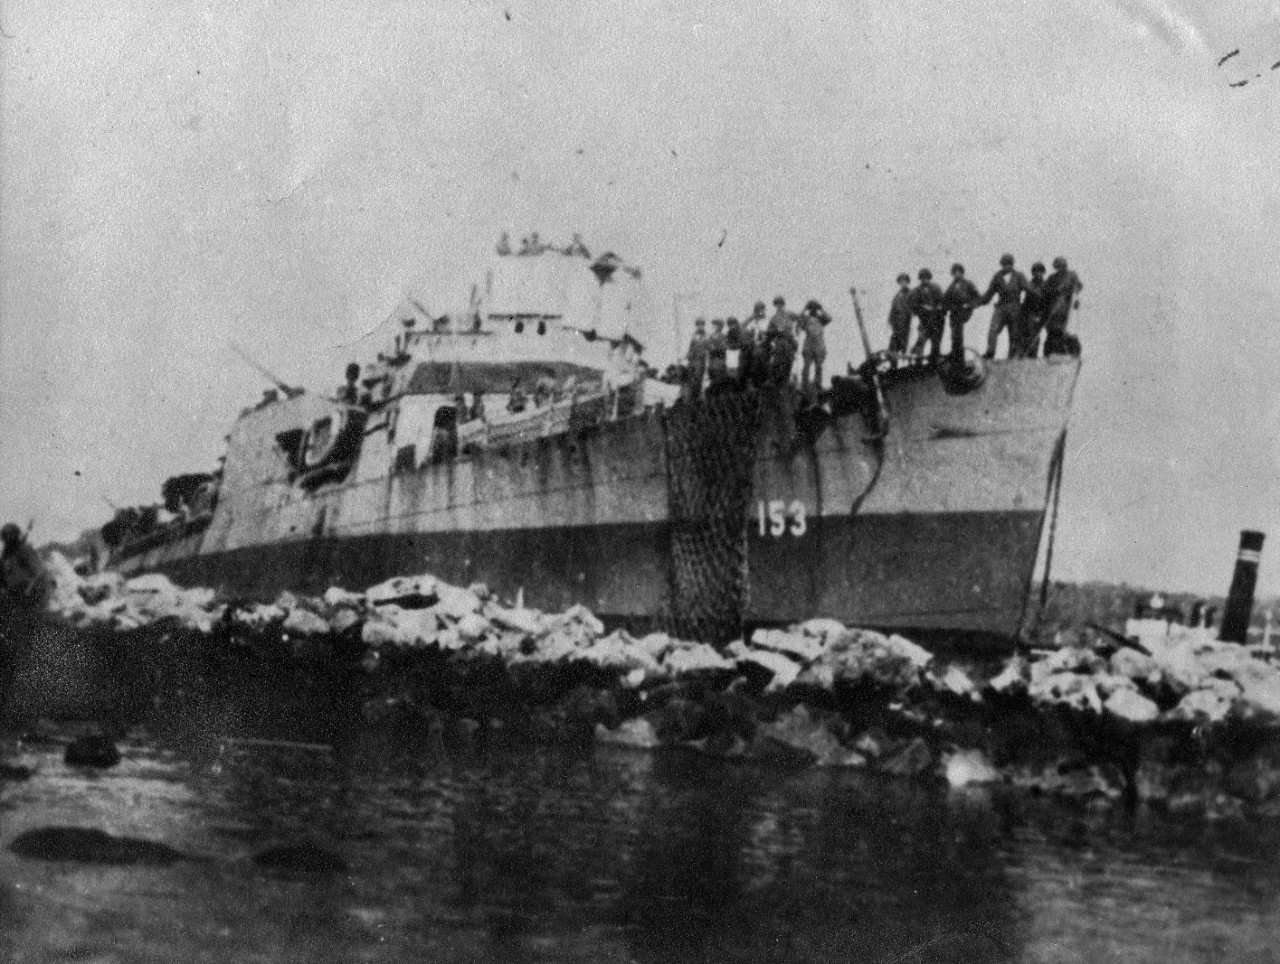 USS Bernadou (DD-153) after landing operations at Safi, French Morocco during Operation Torch landings, November 1942. The destroyer had been modified to land troops in the invasion.